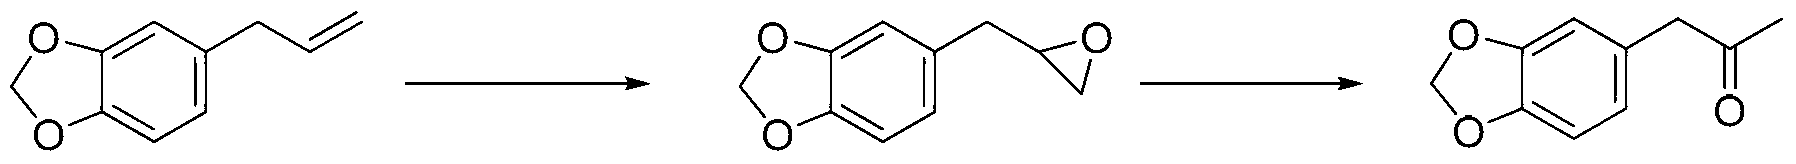 Method for preparing 3,4-methylenedioxophenyl-2-acetone from benzofuranol side product used as raw material